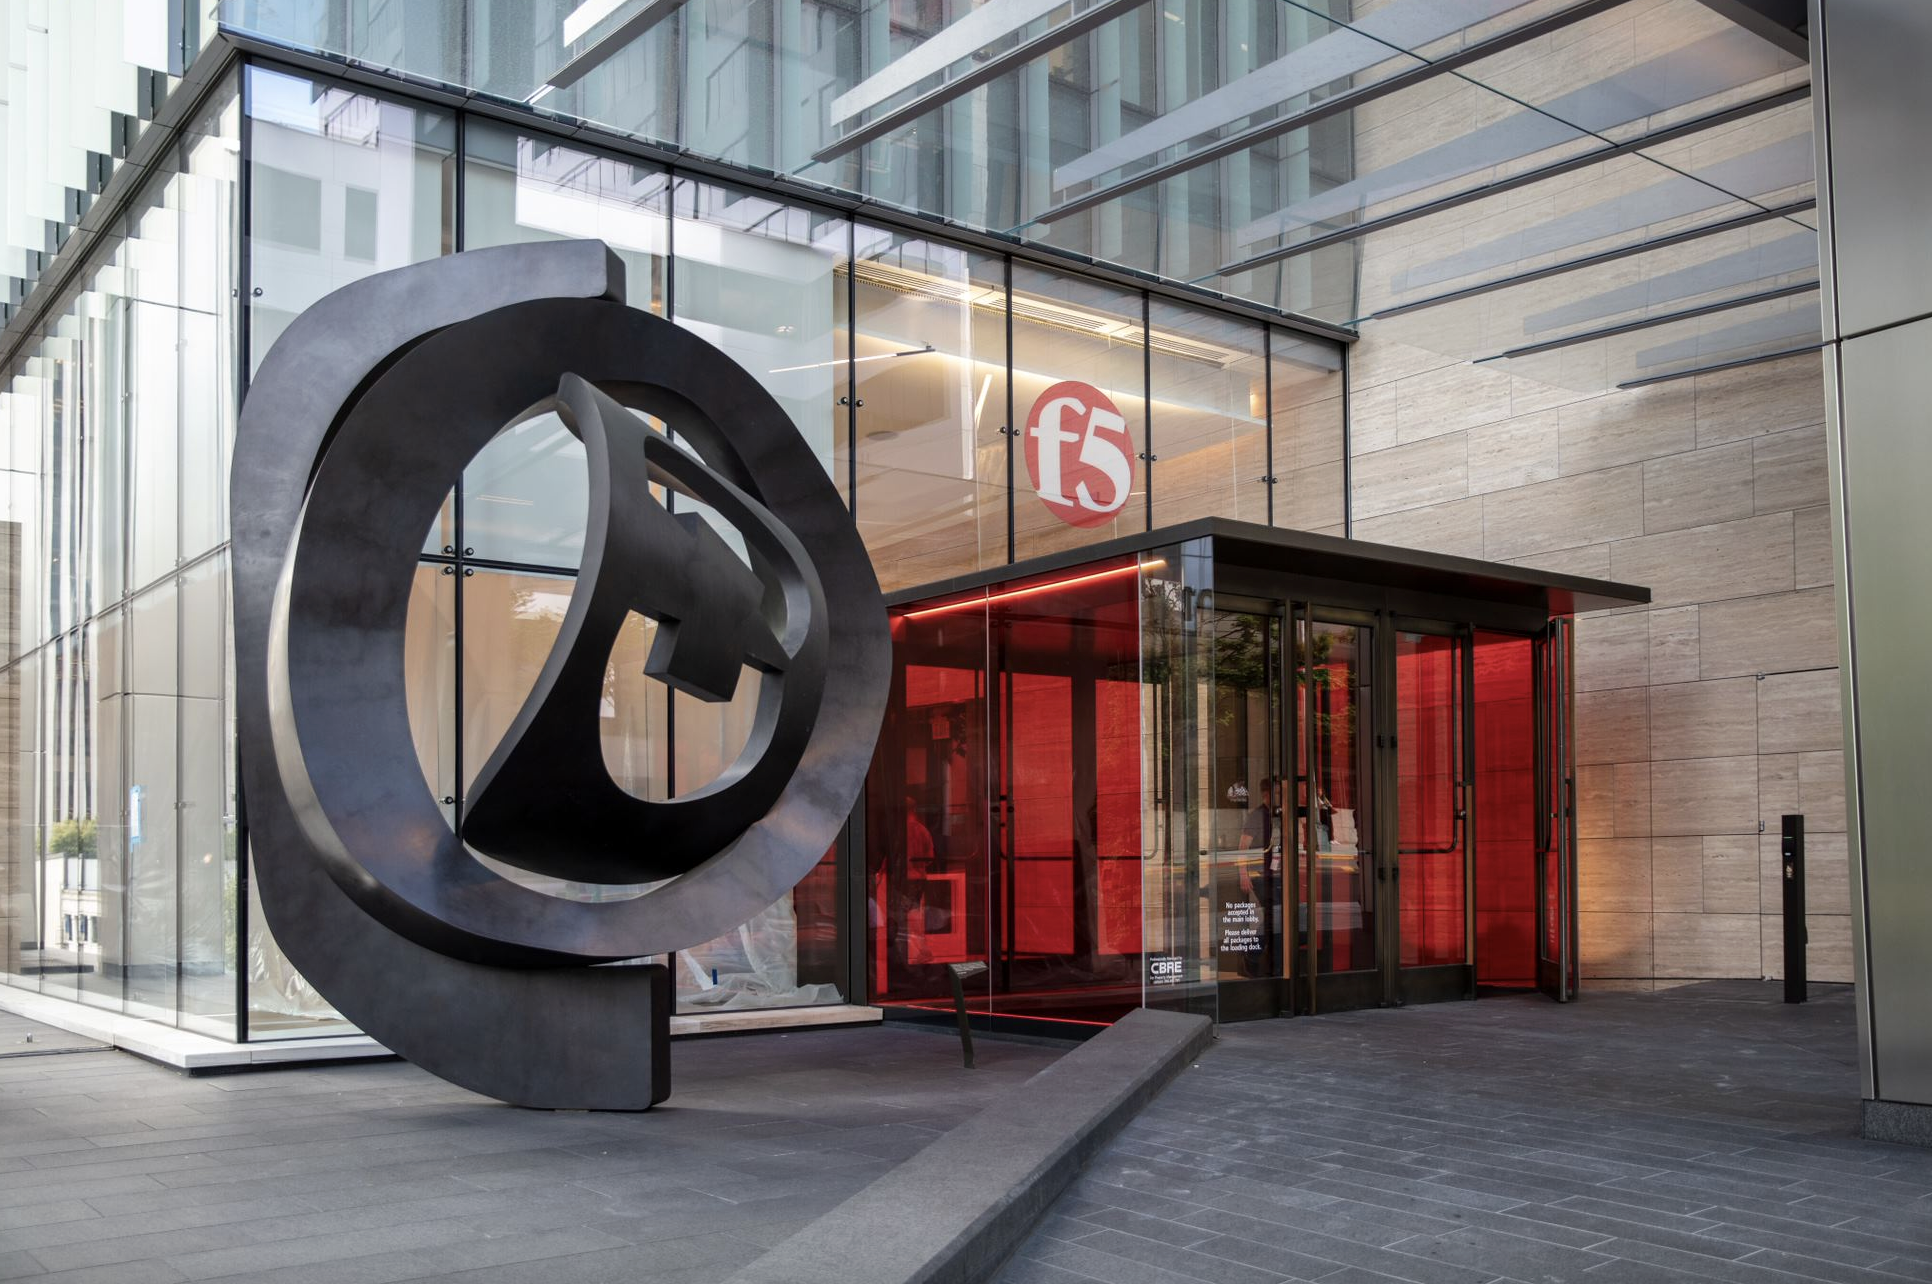 The entrance to F5's headquarters building in downtown Seattle. Credit: F5